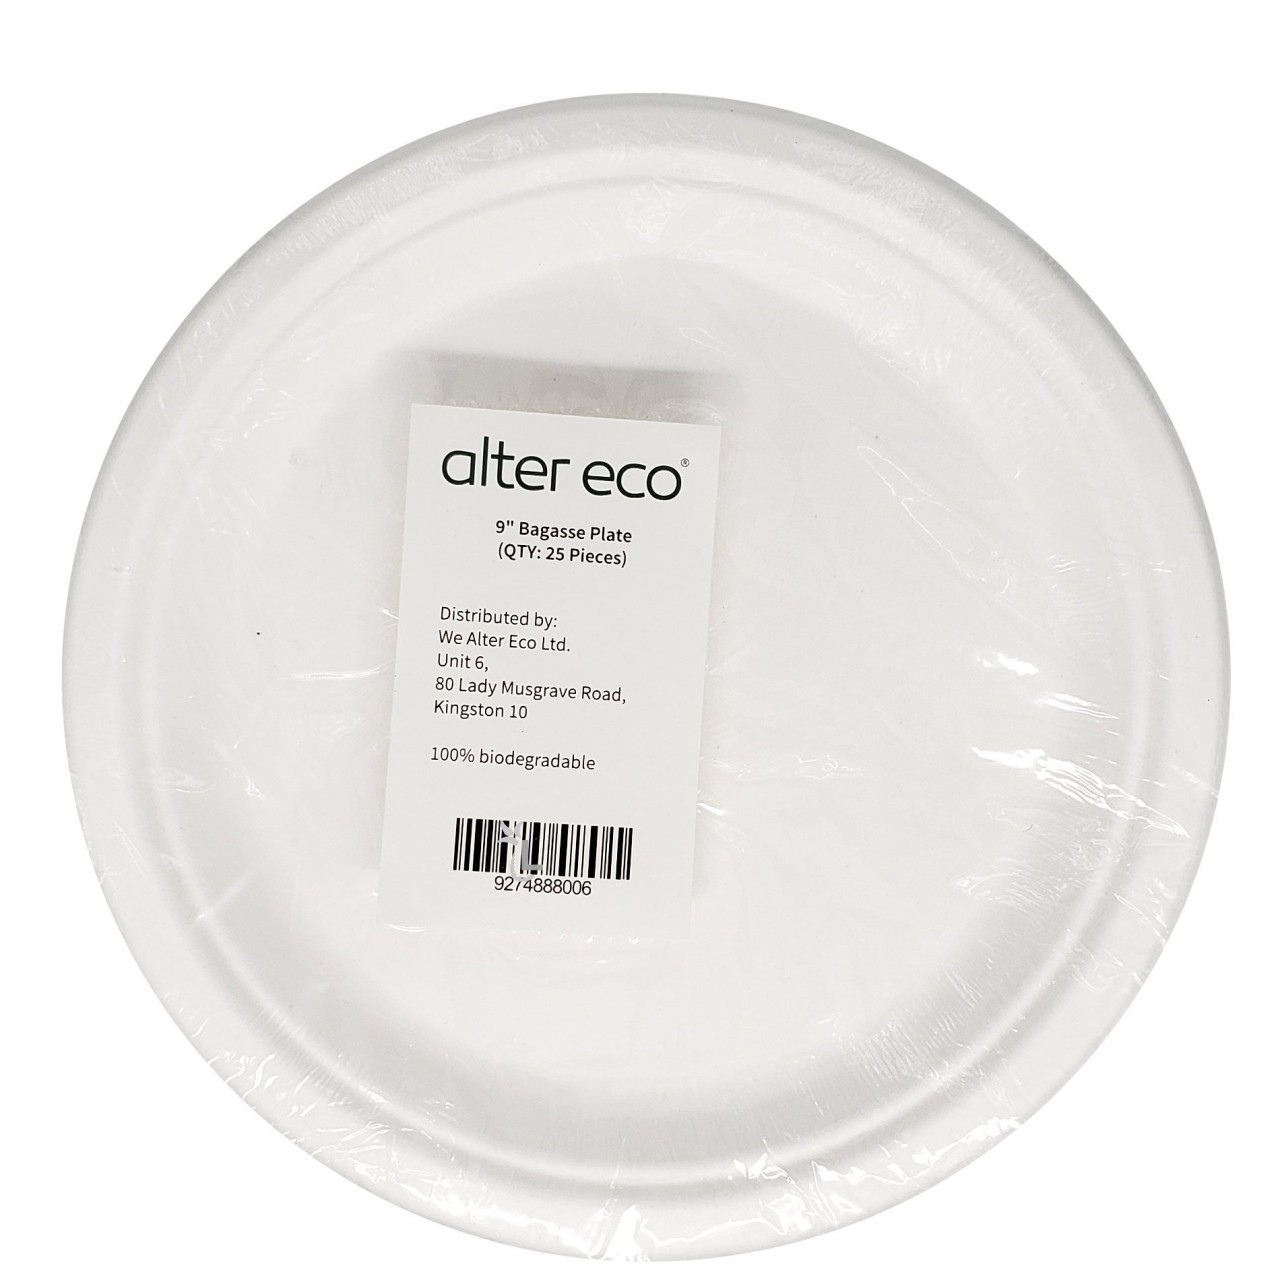 ALTER ECO BAGASSE PLATE ROUND 25x9in